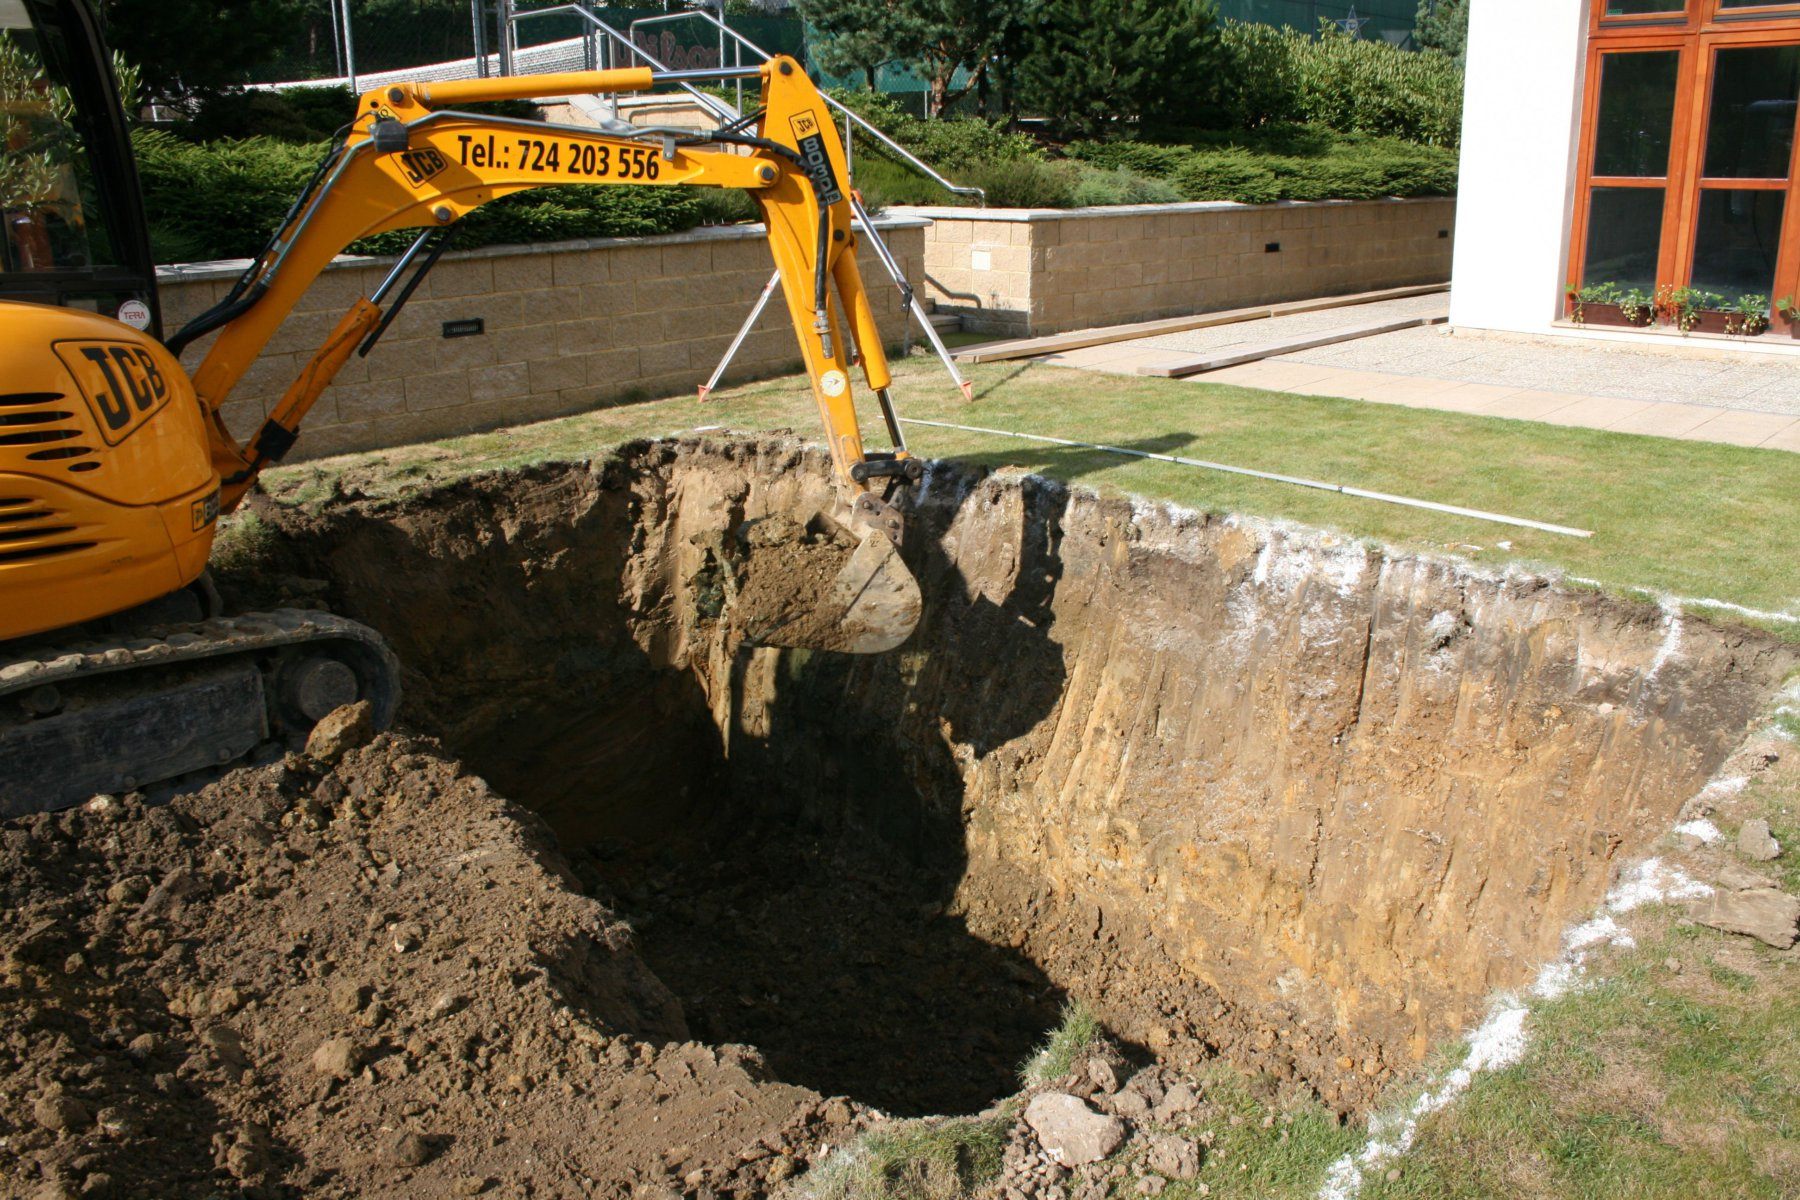 Ceramic pool installation – earth works with an excavator